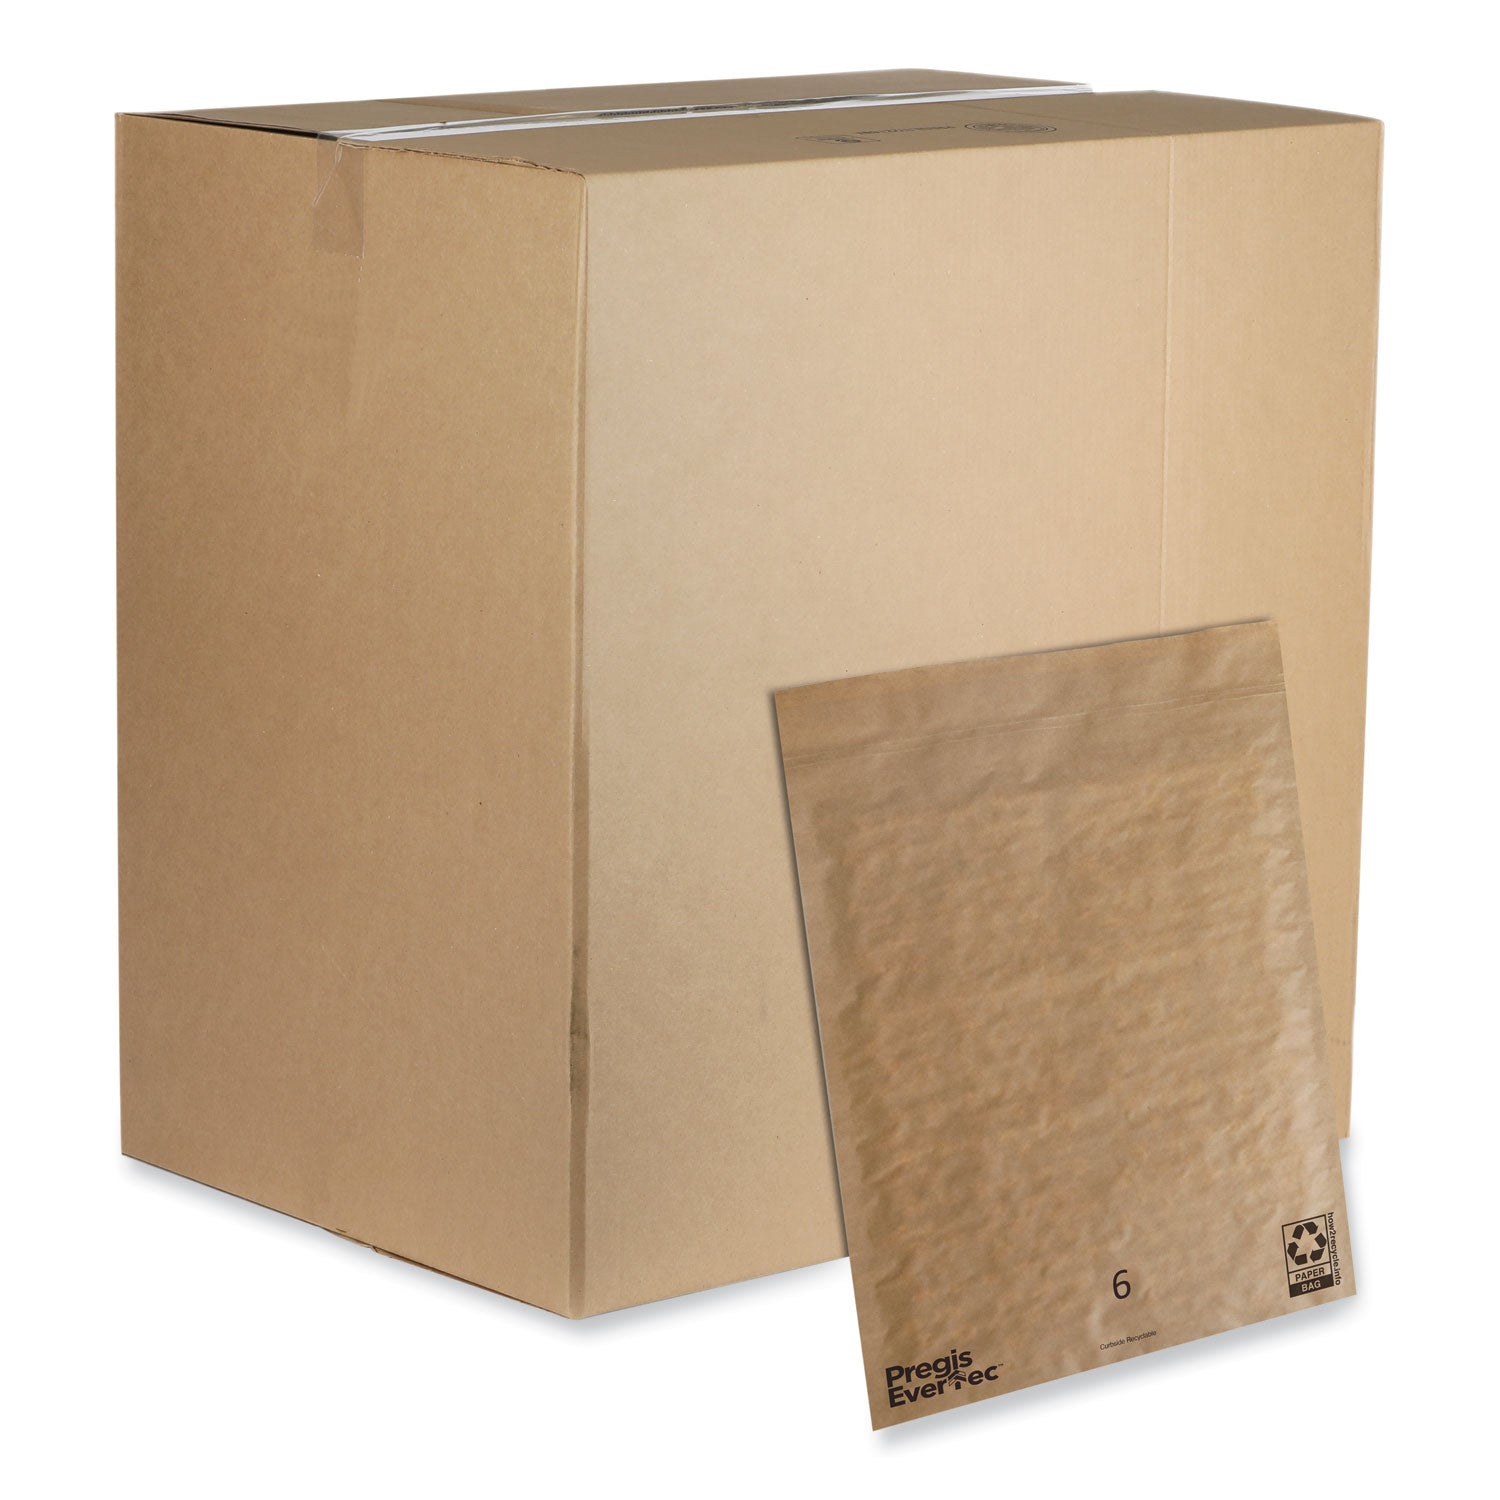 EverTec Curbside Recyclable Padded Mailer, #6, Kraft Paper, Self-Adhesive Closure, 14 x 18, Brown, 50/Carton - 1